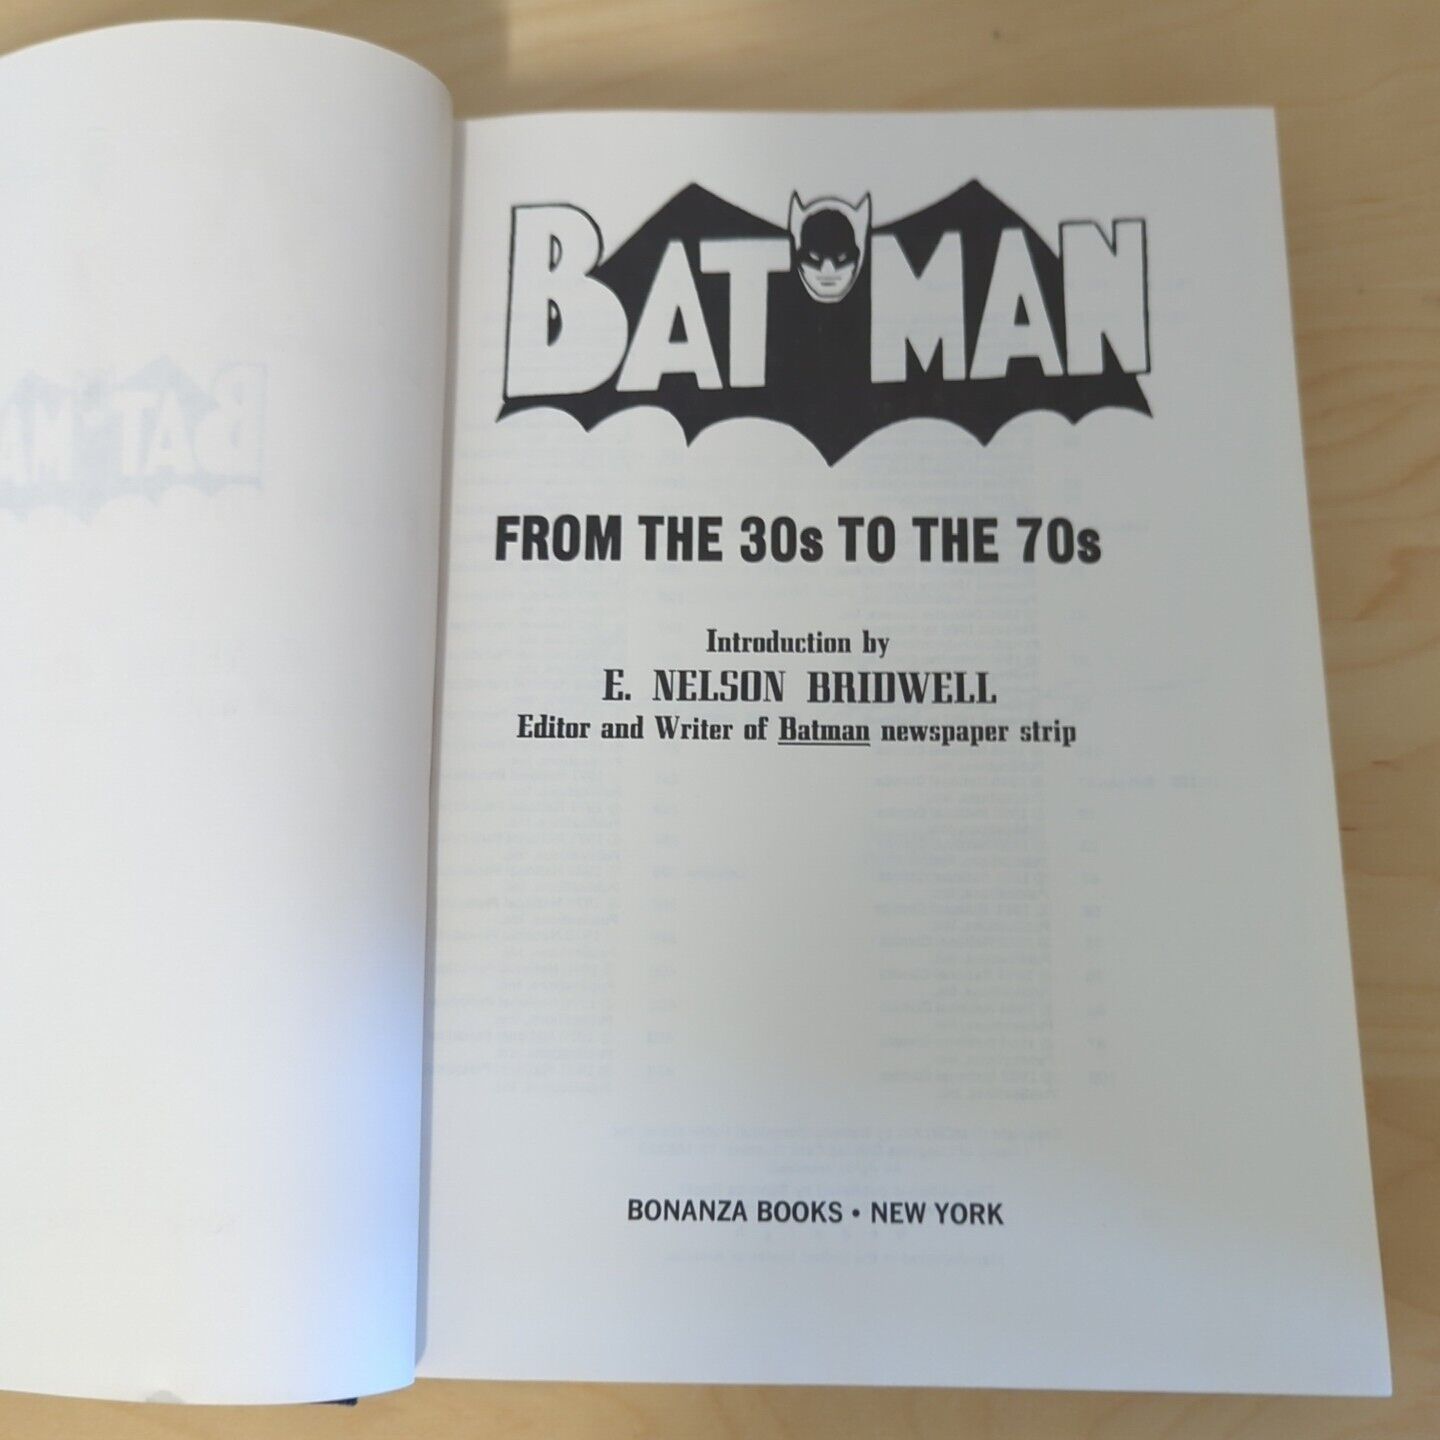 BATMAN: From The 30s TO THE 70s Hardcover Book 1971 DC NO DUSTJACKET